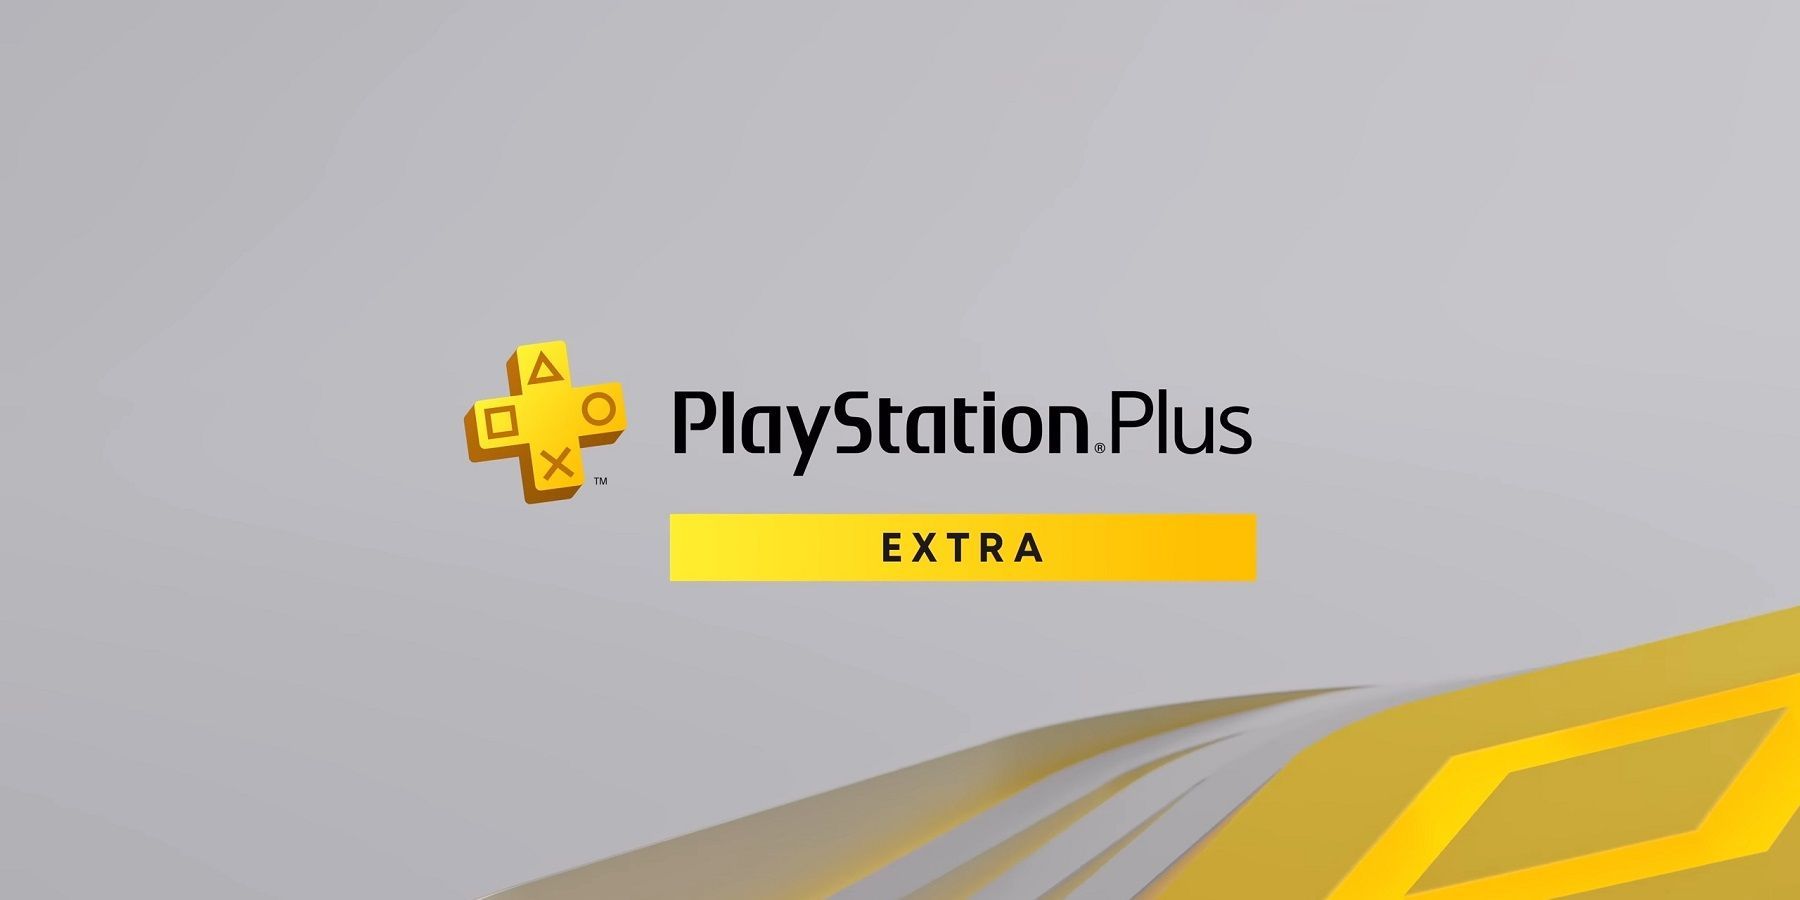 PS Plus 50% discount is too good to miss as PlayStation slashes